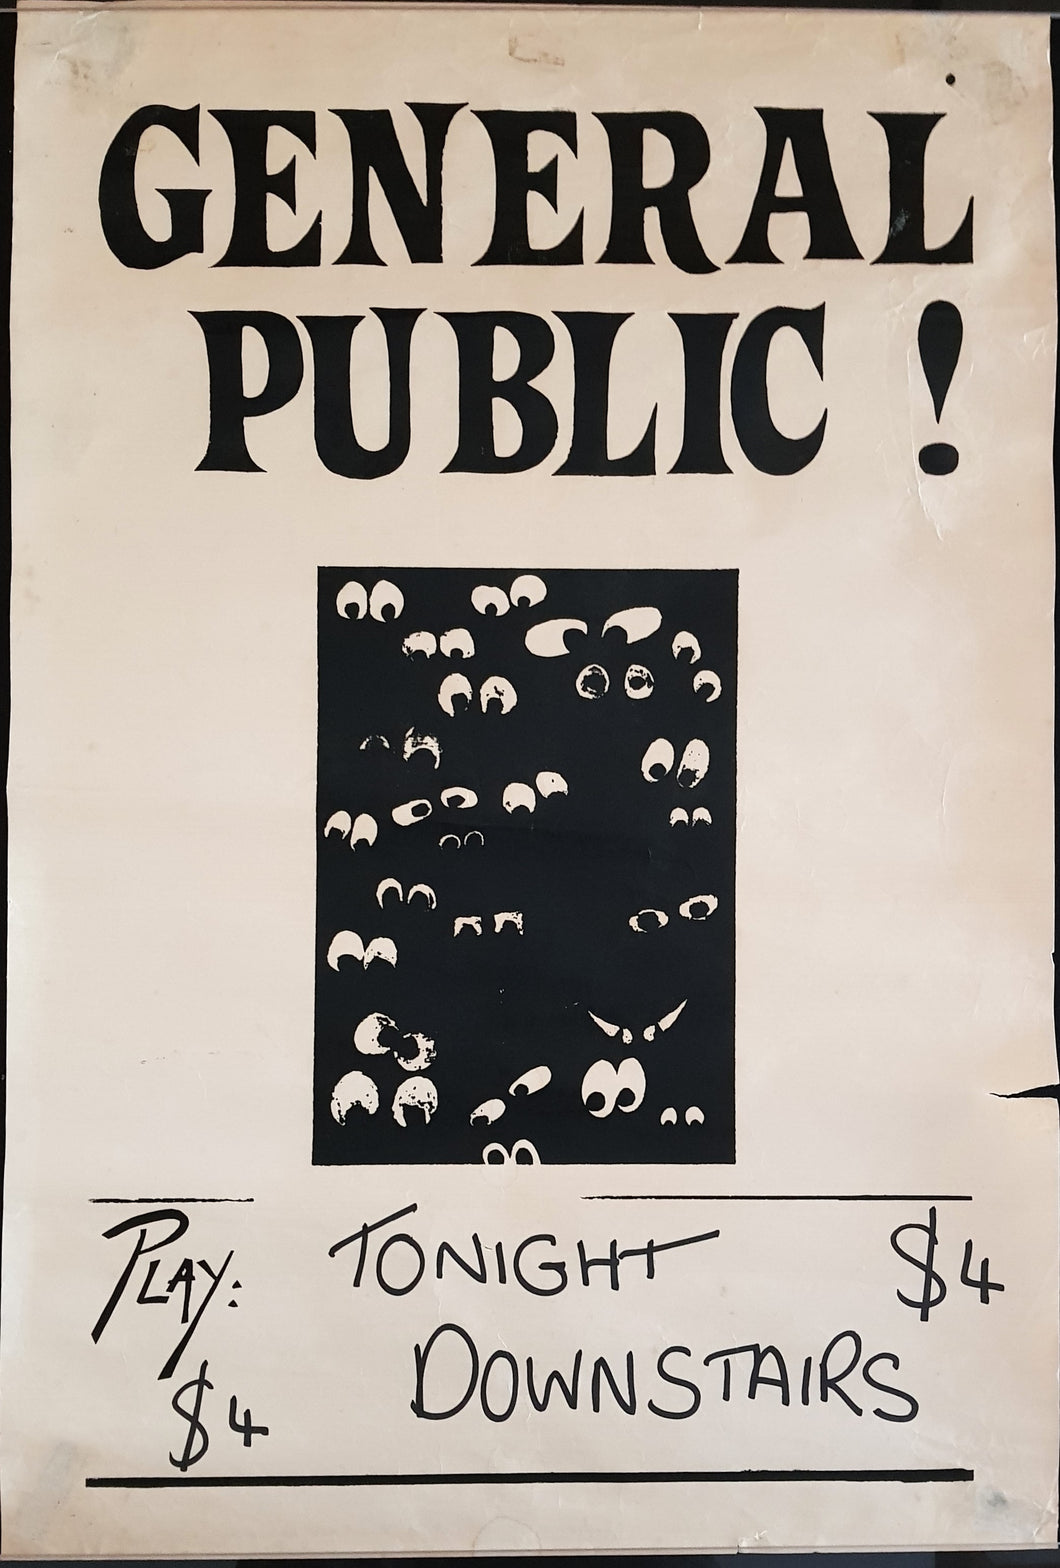 General Public! (OZ 80's) - Play: Tonight Downstairs $4